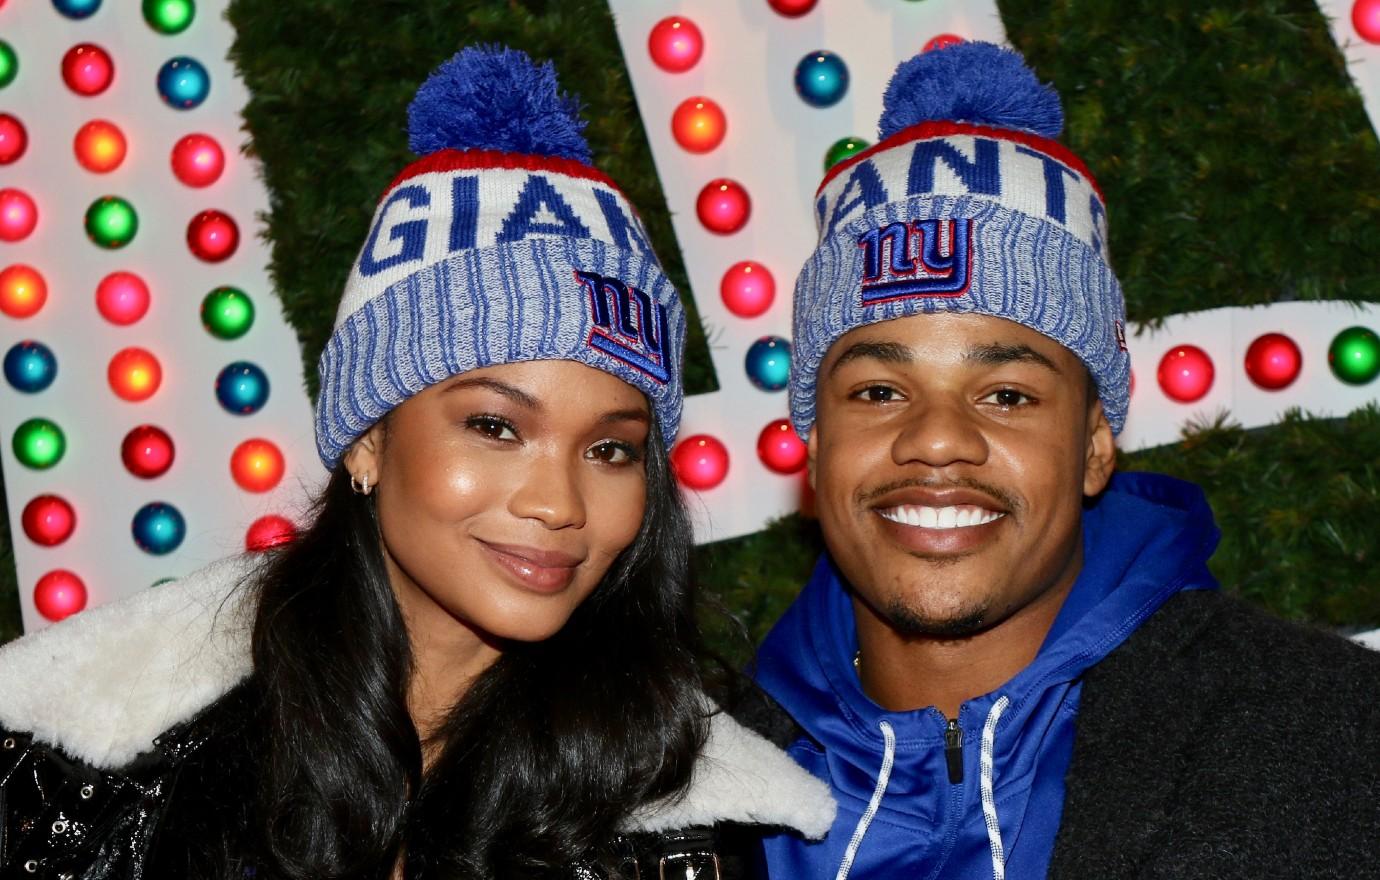 Chanel Iman Is Pregnant With Baby No. 2 With Husband Sterling Shepard